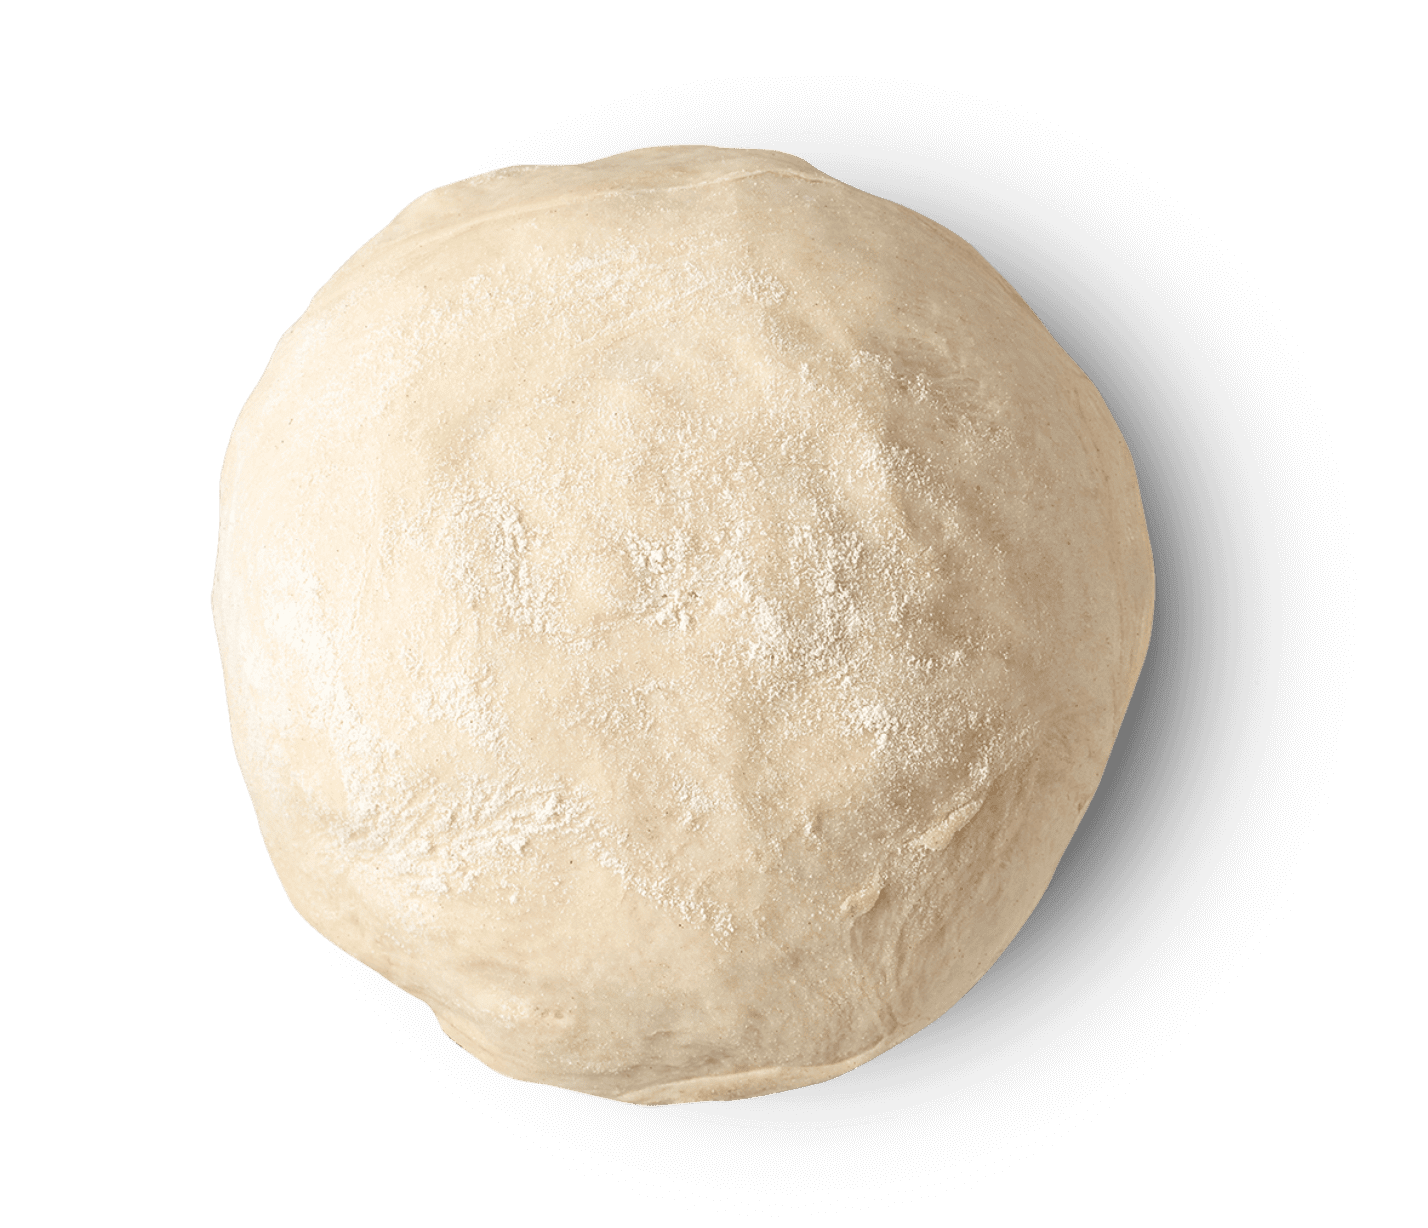 Holy Napoli uses the highest quality ingredients for authentic pizza dough